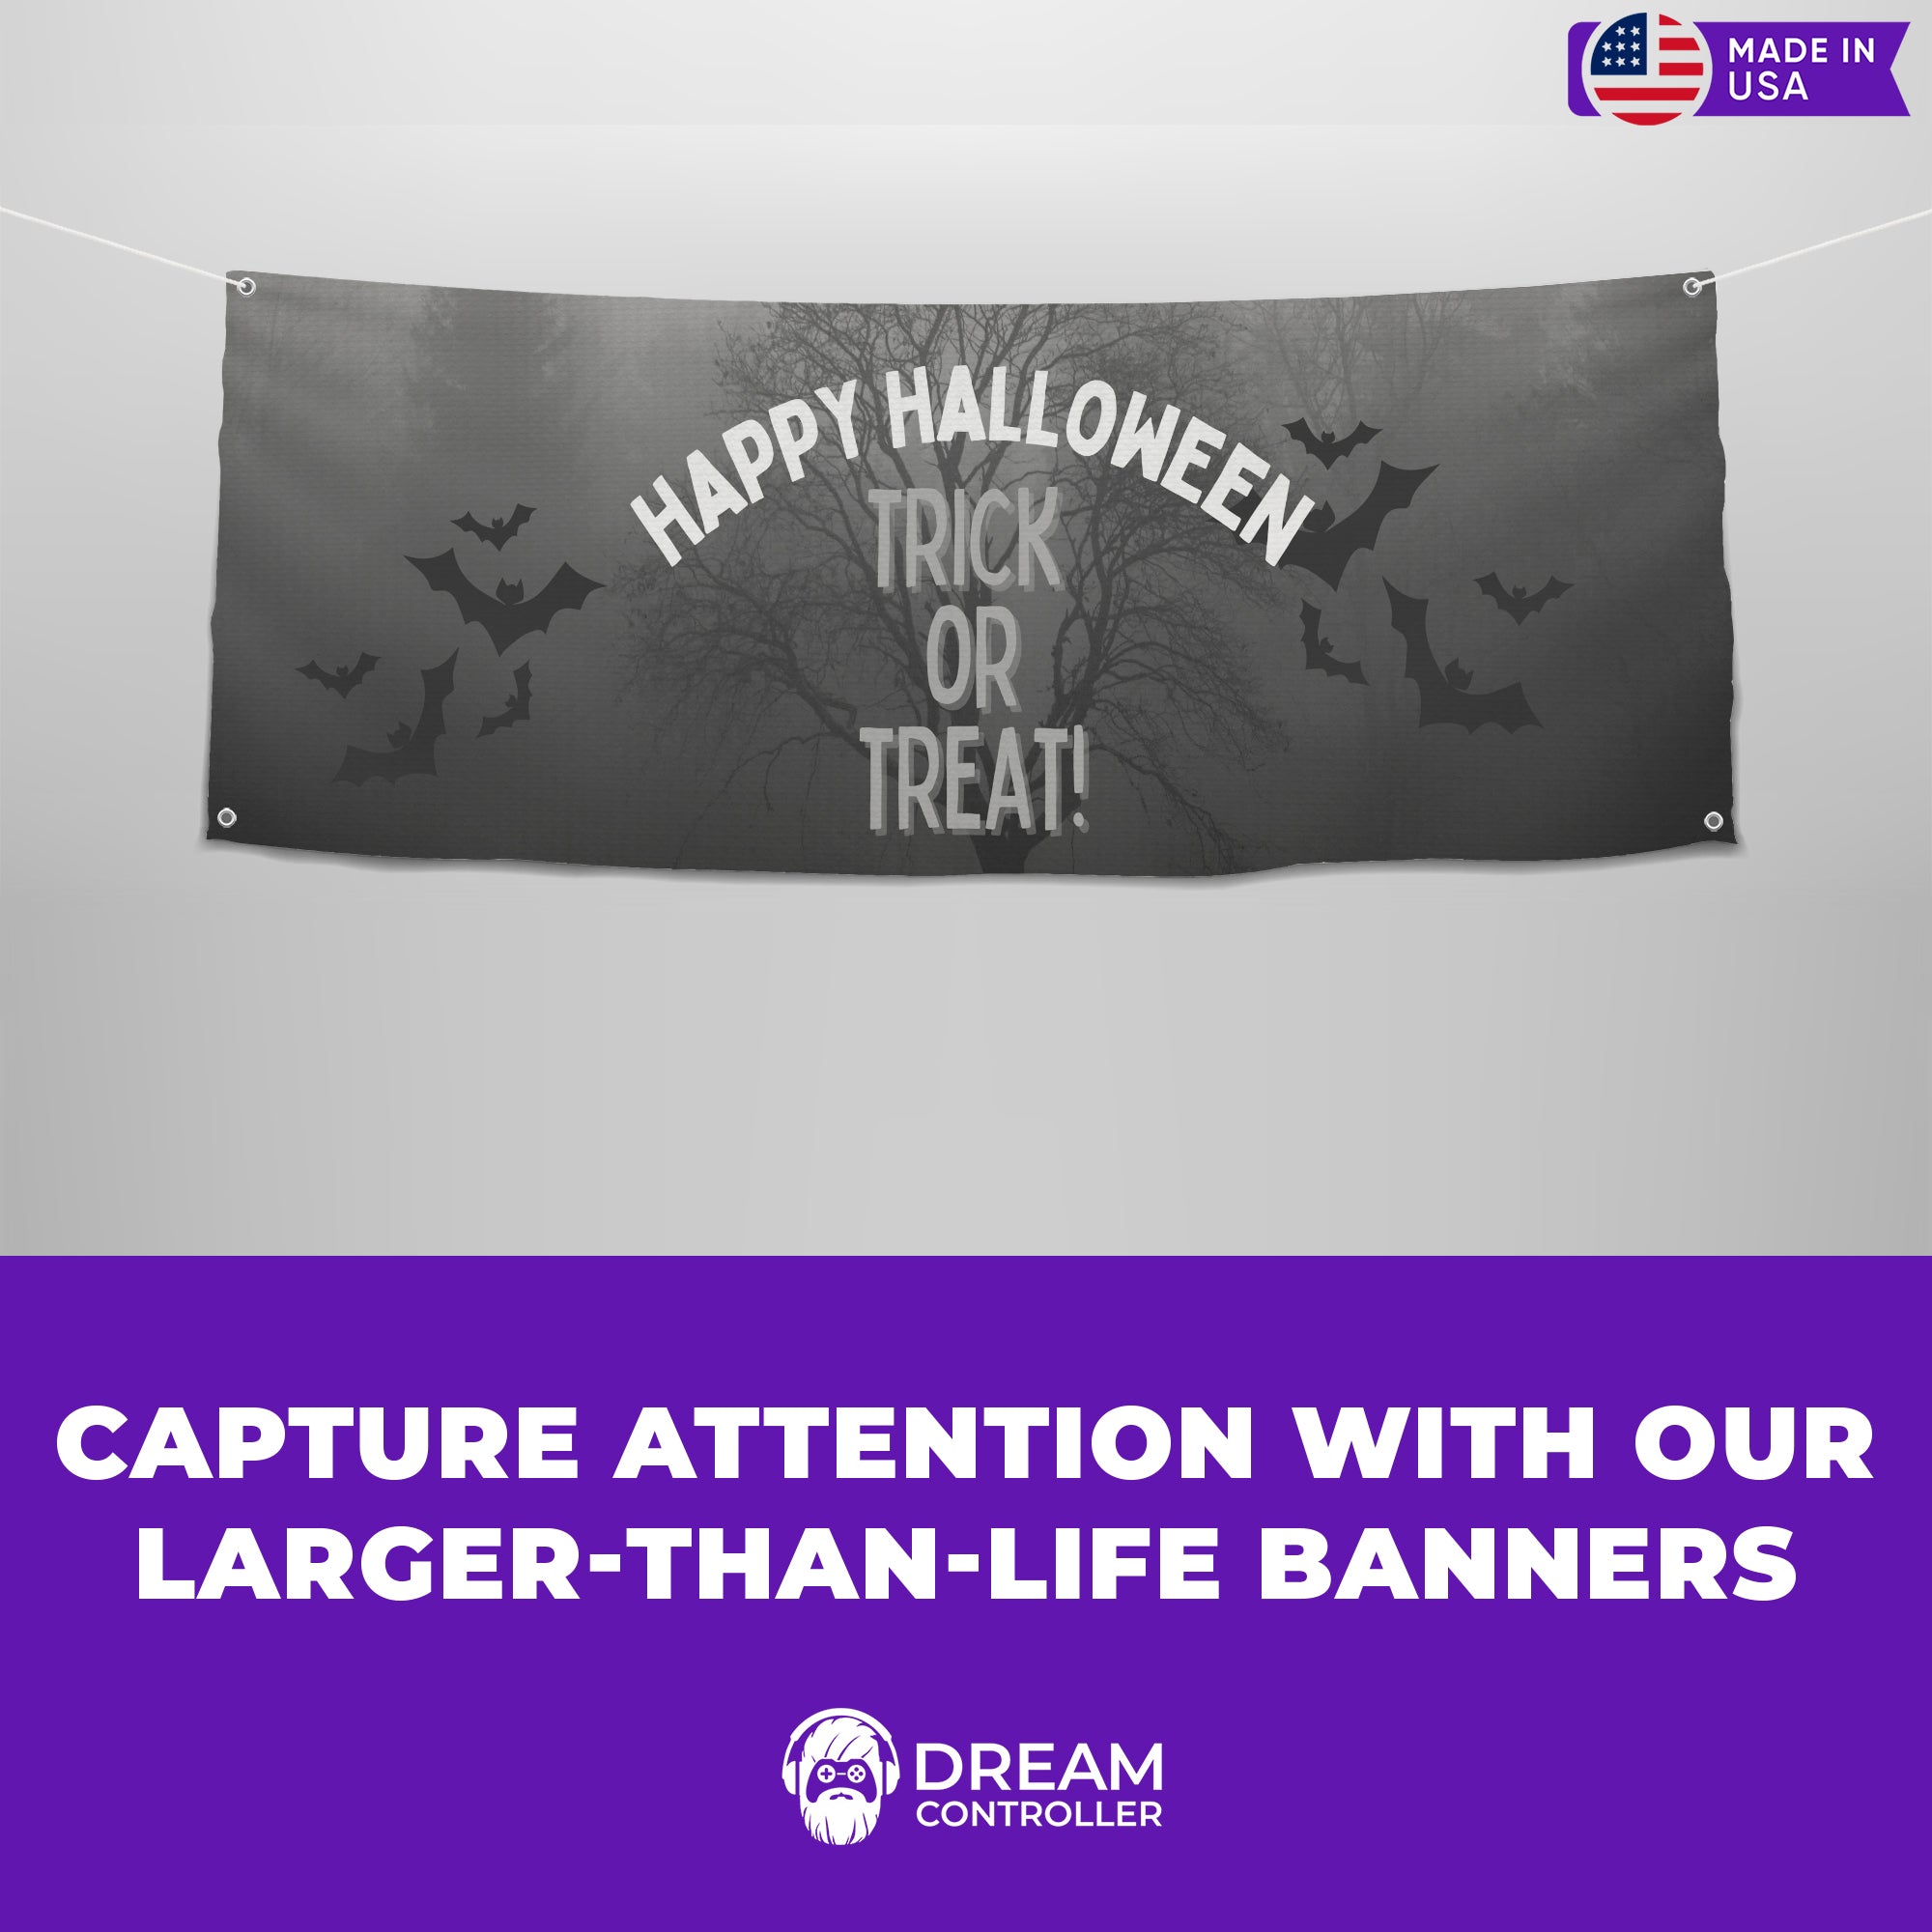 Gray Halloween Banner - Dark and Mysterious Aesthetic, Premium Quality Fabric